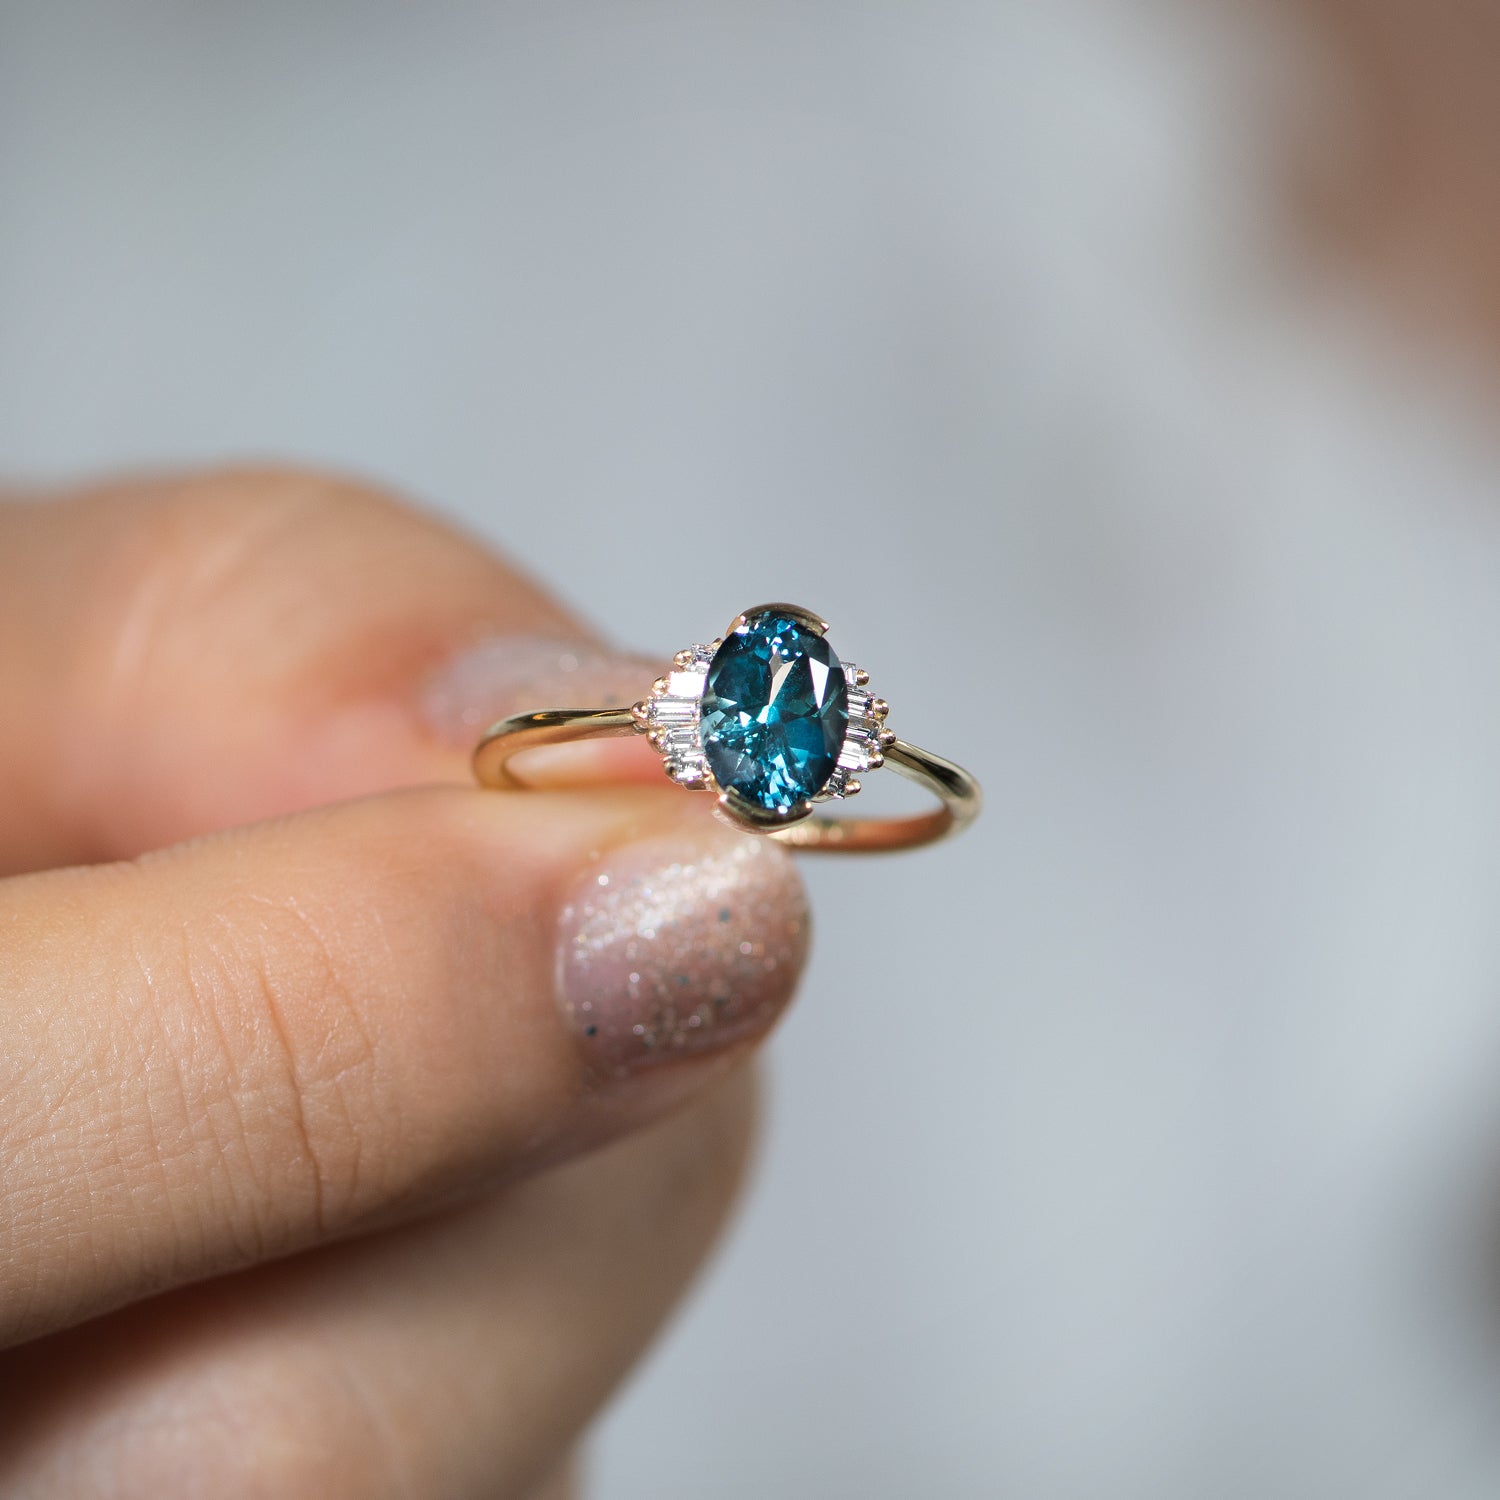 We're crushing on this 14K White Gold Oval Sapphire & Diamond Ring! 💙 The  perfect piece to make a statement. Visit us in-store or online … | Instagram